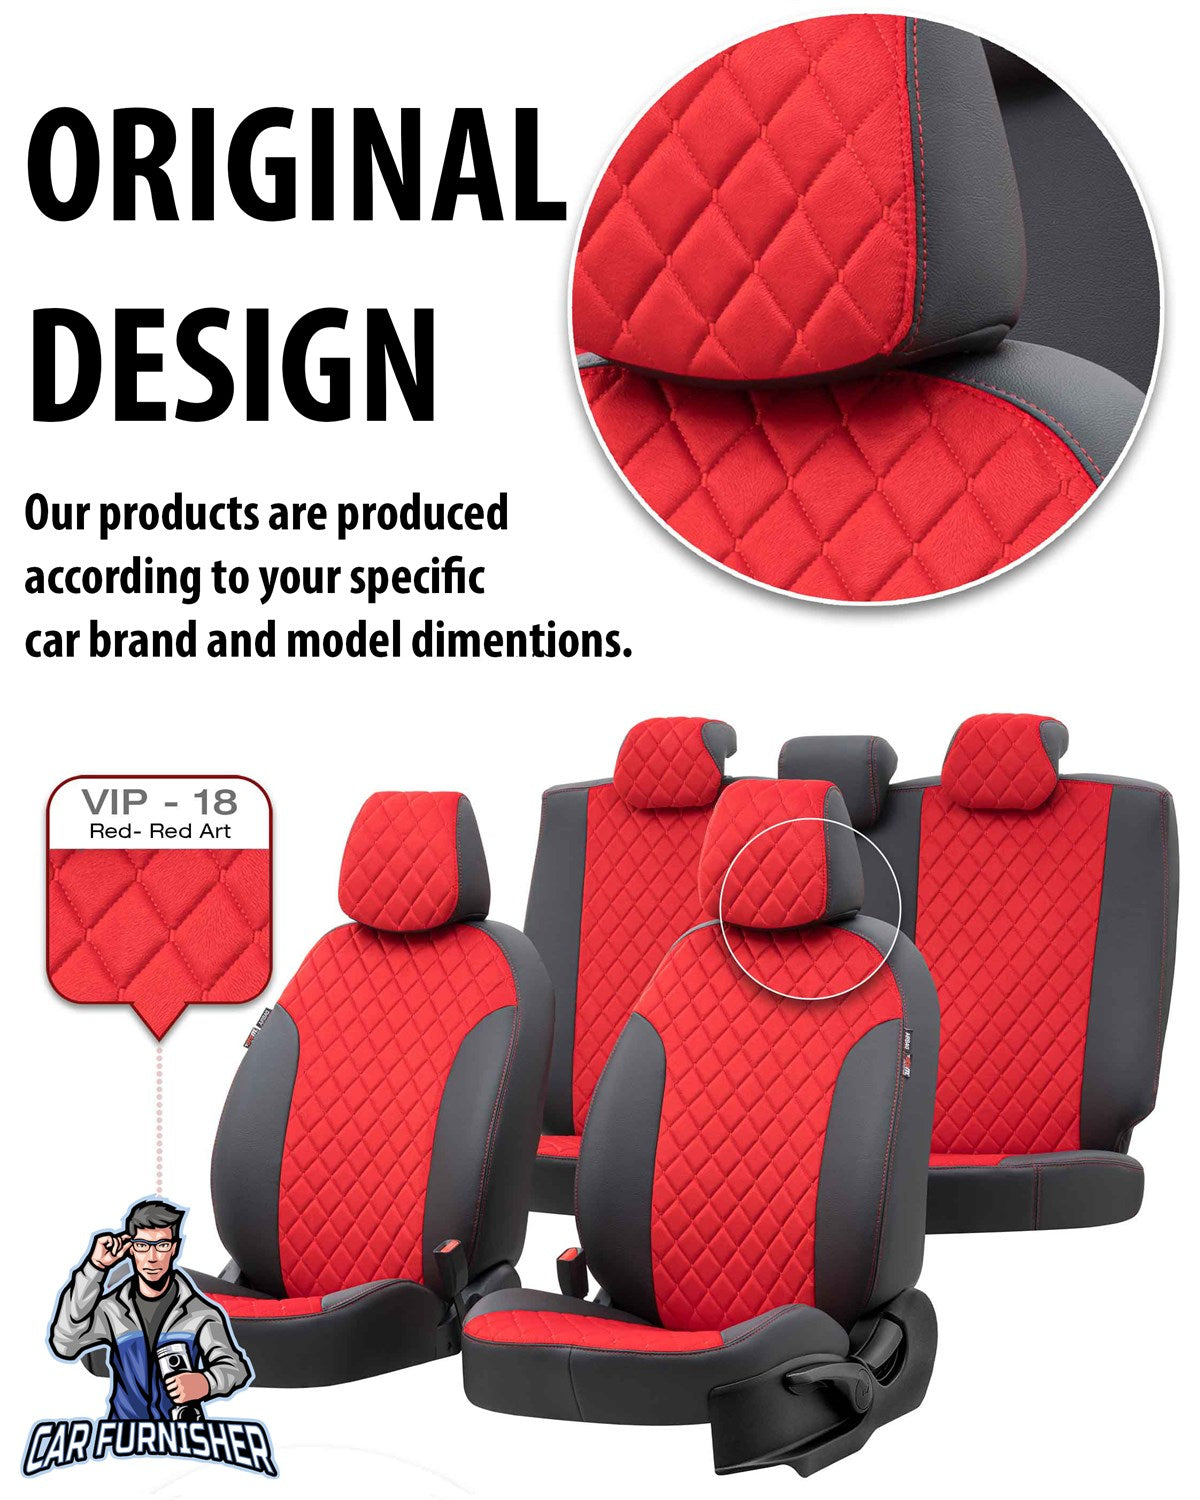 Fiat Fiorino Seat Covers Madrid Foal Feather Design Dark Gray Leather & Foal Feather